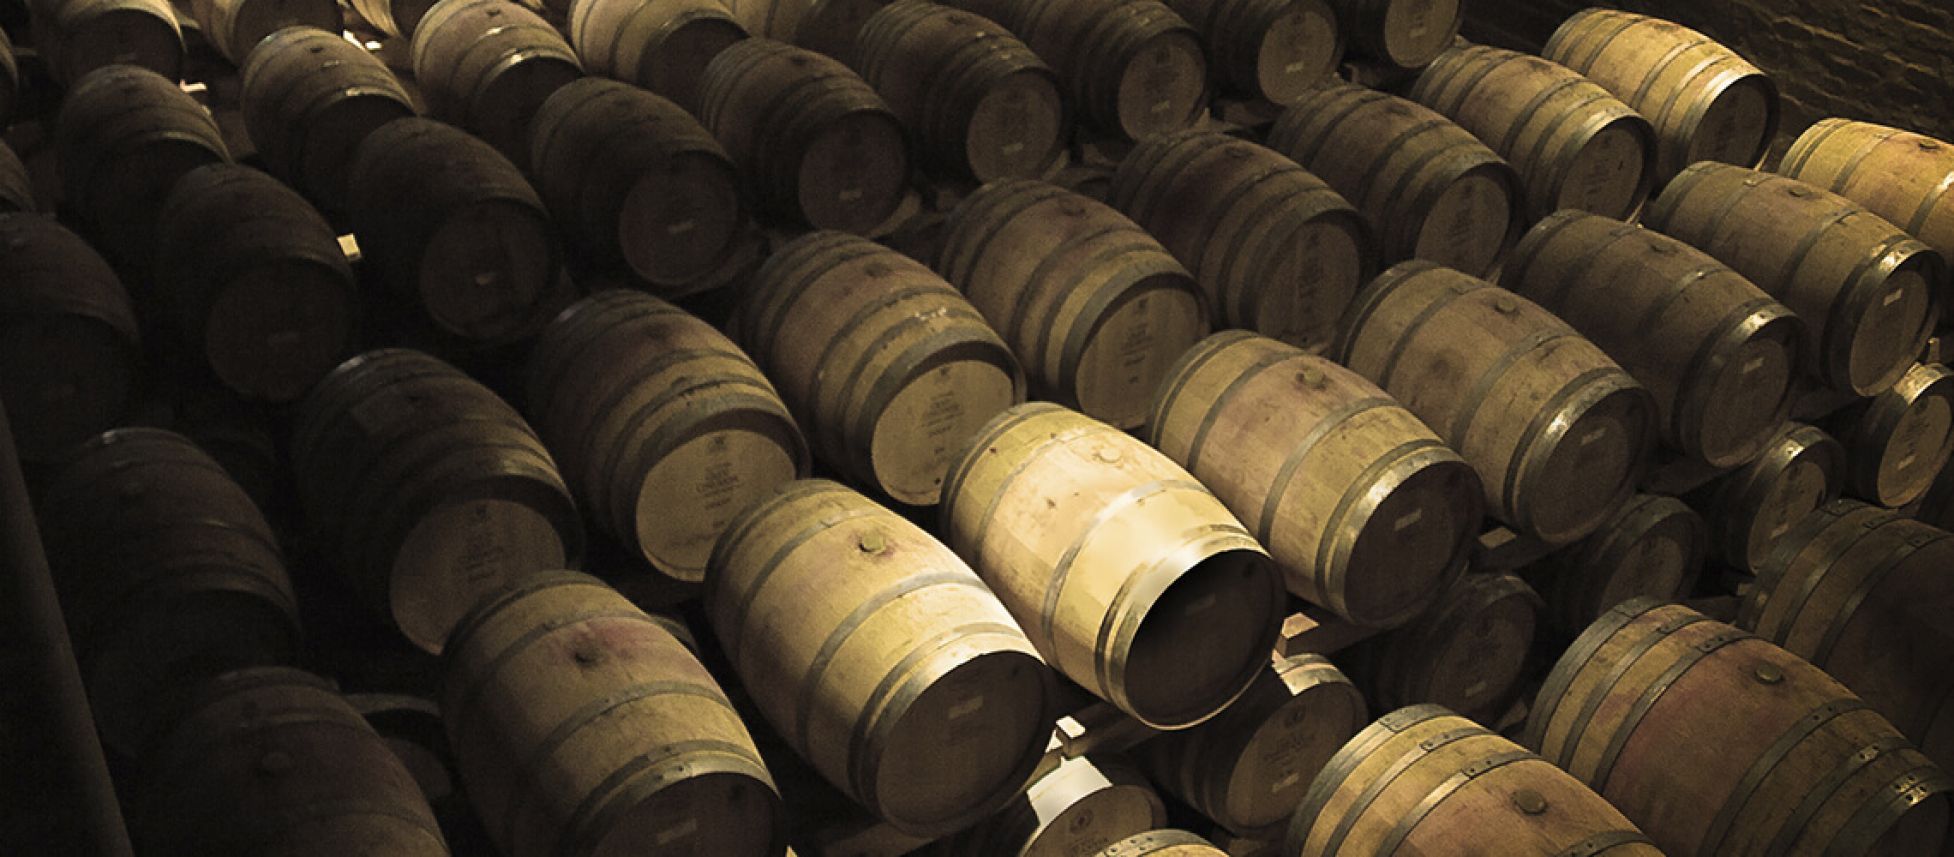 Photo for: Factors You Must Consider When Buying Bulk Wine